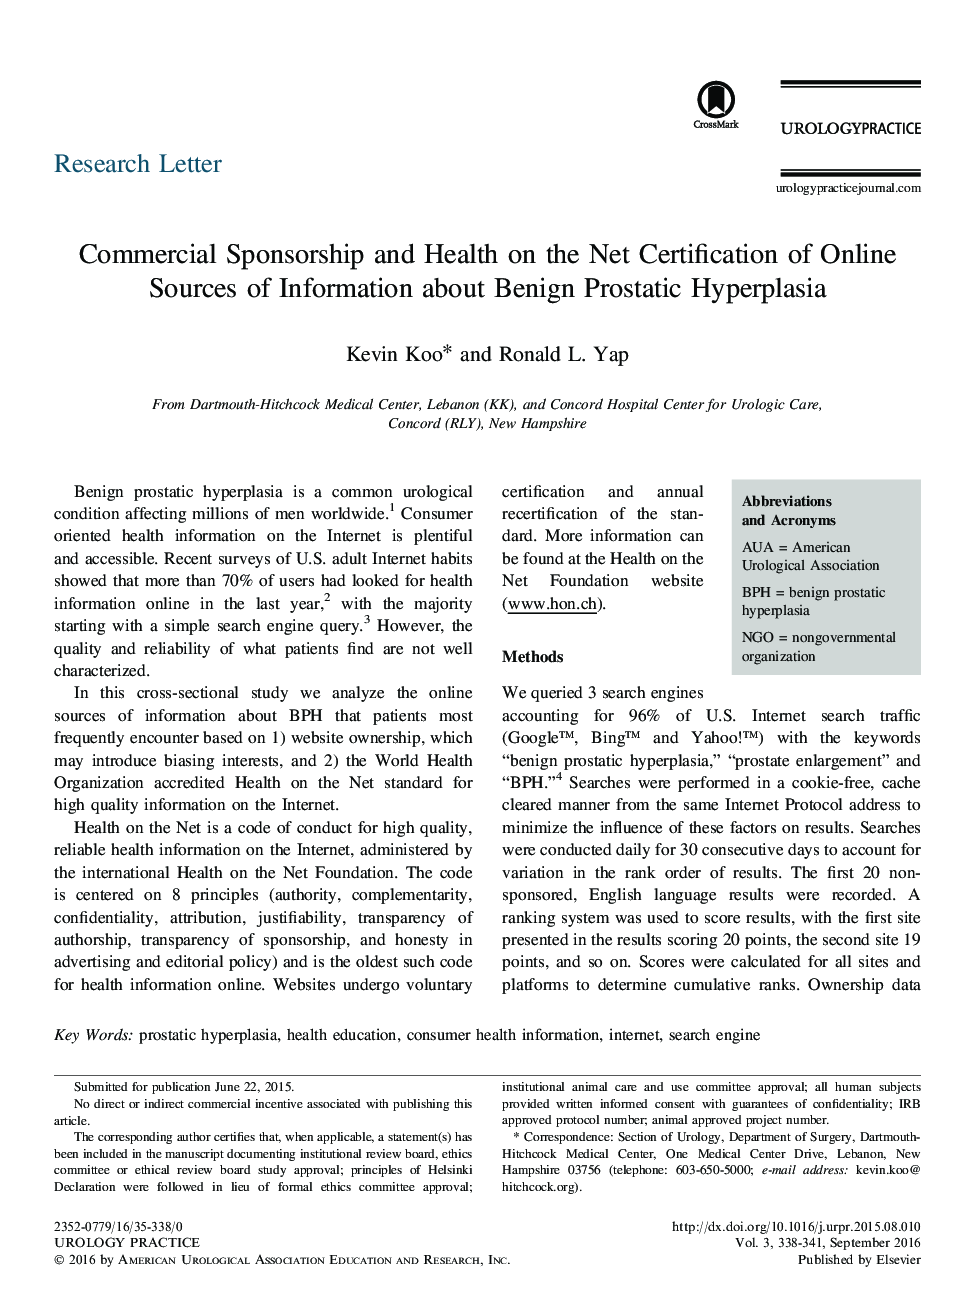 Commercial Sponsorship and Health on the Net Certification of Online Sources of Information about Benign Prostatic Hyperplasia